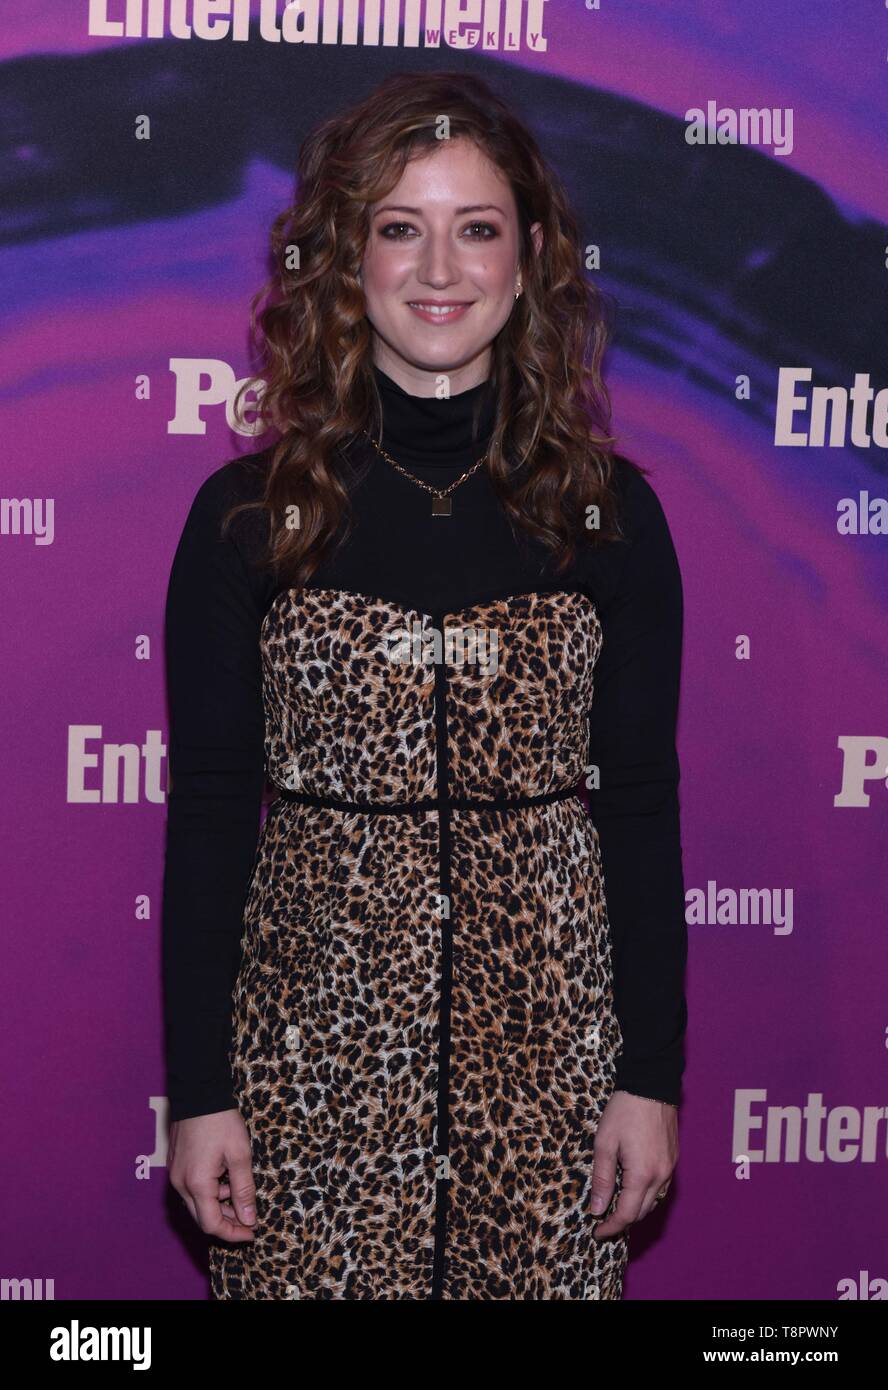 NEW YORK, NEW YORK - MAY 13: Jessy Hodges attends the People & Entertainment Weekly 2019 Upfronts at Union Park on May 13, 2019 in New York City. Photo: Jeremy Smith/imageSPACE/MediaPunch Stock Photo